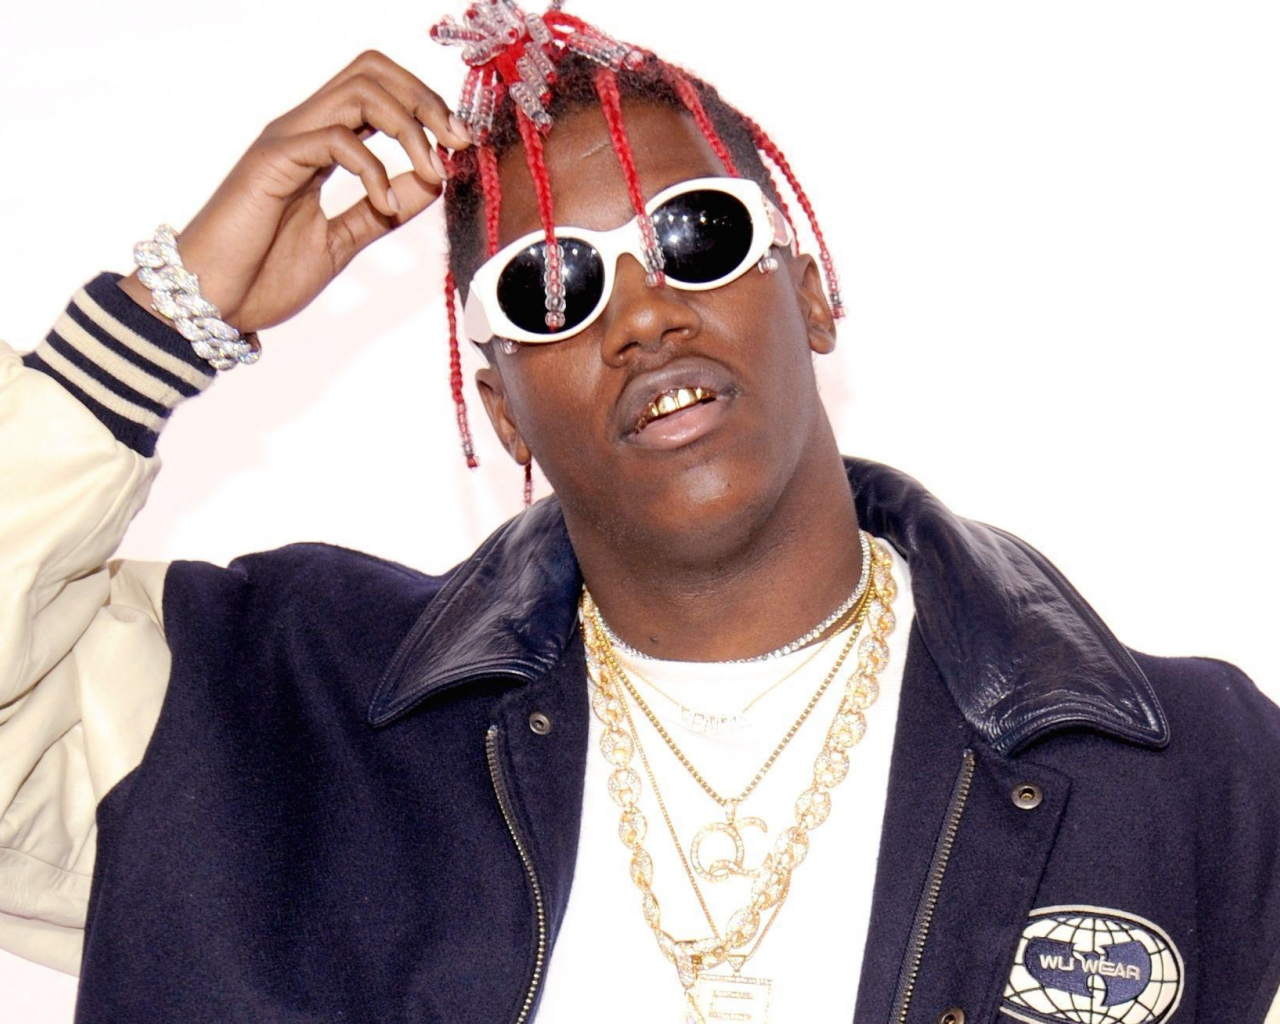 Free download Lil Yachty Wallpaper [2615x1307] for your Desktop, Mobile & Tablet. Explore Lil Yachty 2018 Wallpaper. Lil Yachty 2018 Wallpaper, Lil Yachty Lil Boat 2 Wallpaper, Lil Jon Wallpaper